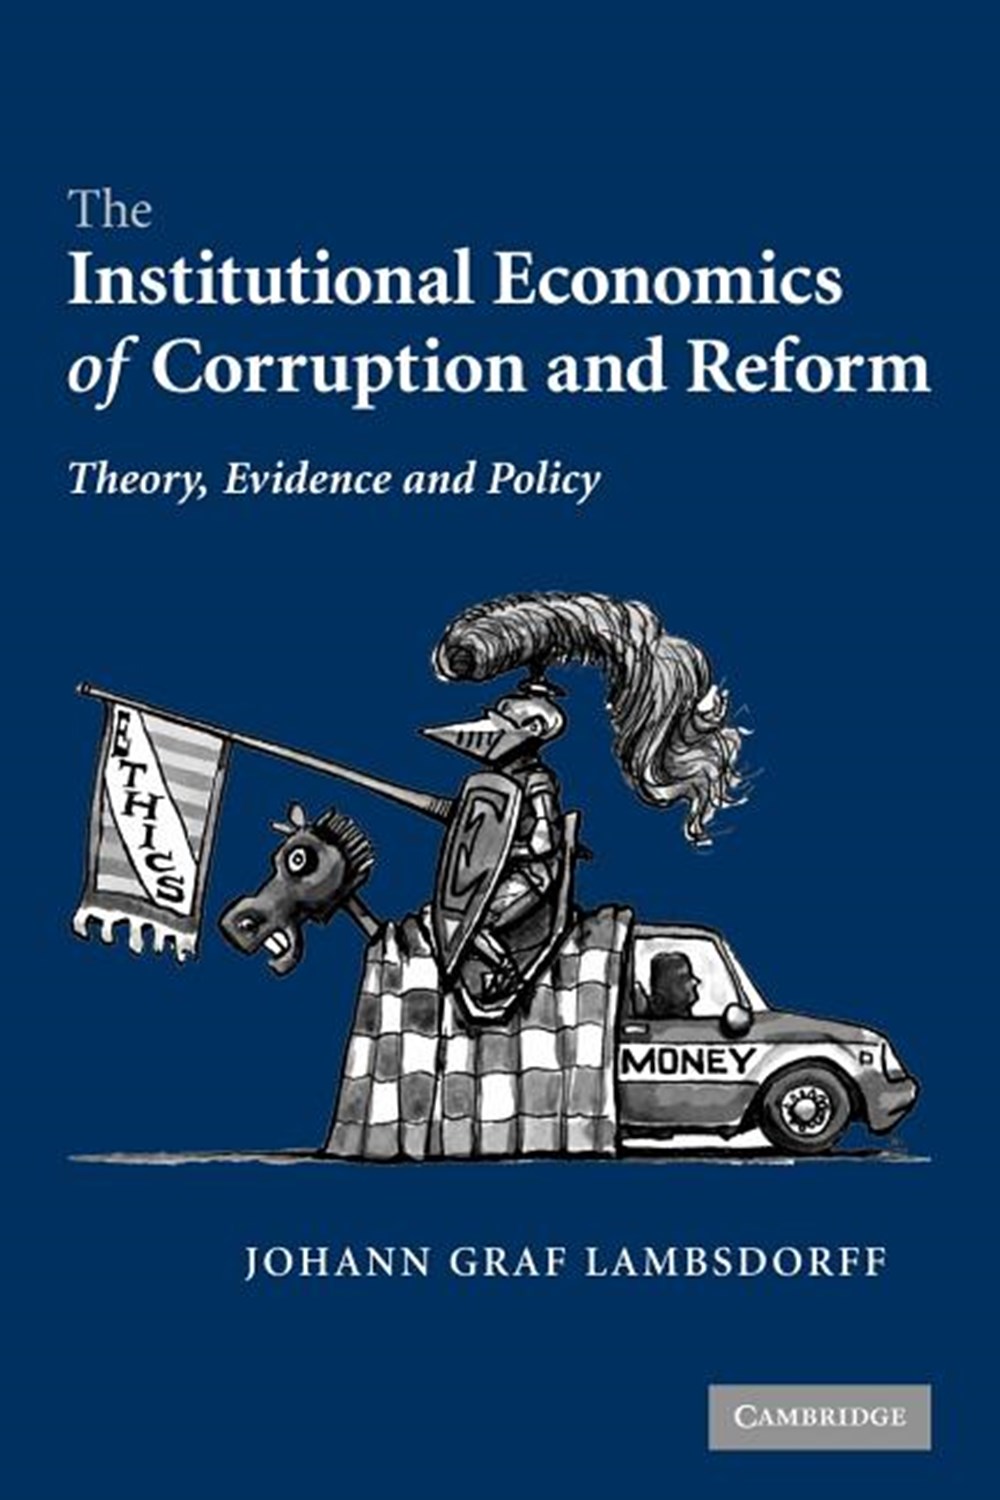 Institutional Economics of Corruption and Reform: Theory, Evidence, and Policy